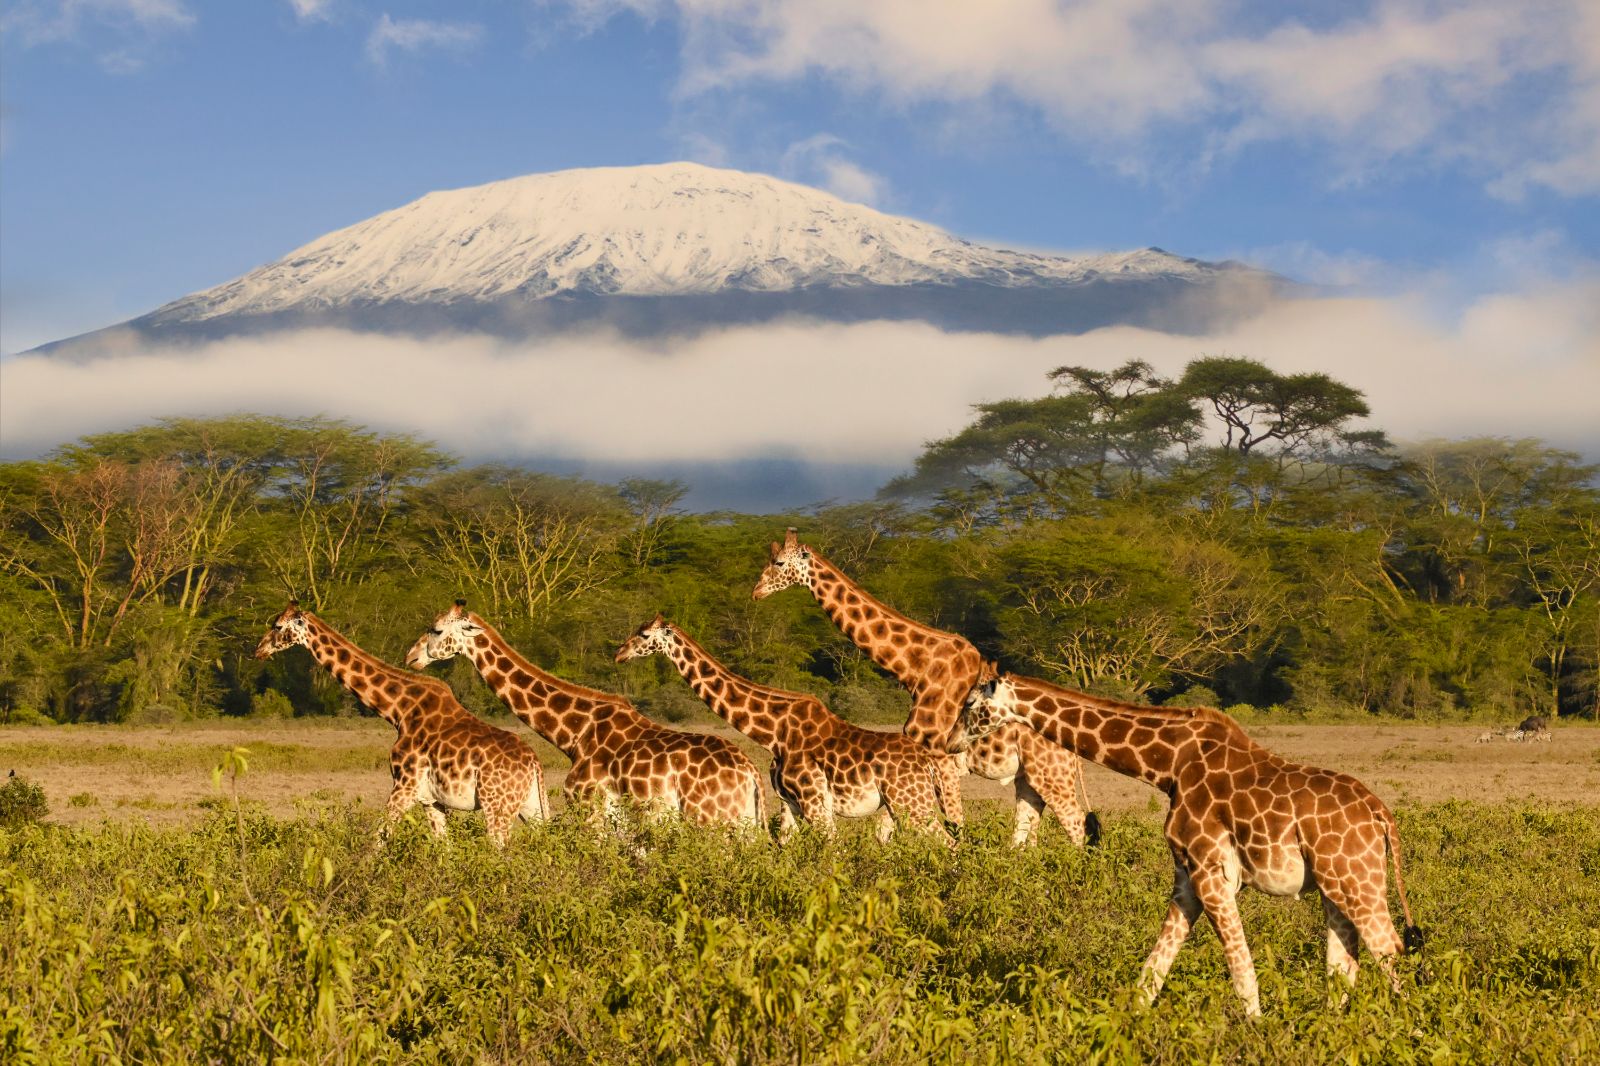 Giraffes on a grassy plain in front of the snowcapped peak of Mount Kilimanjaro